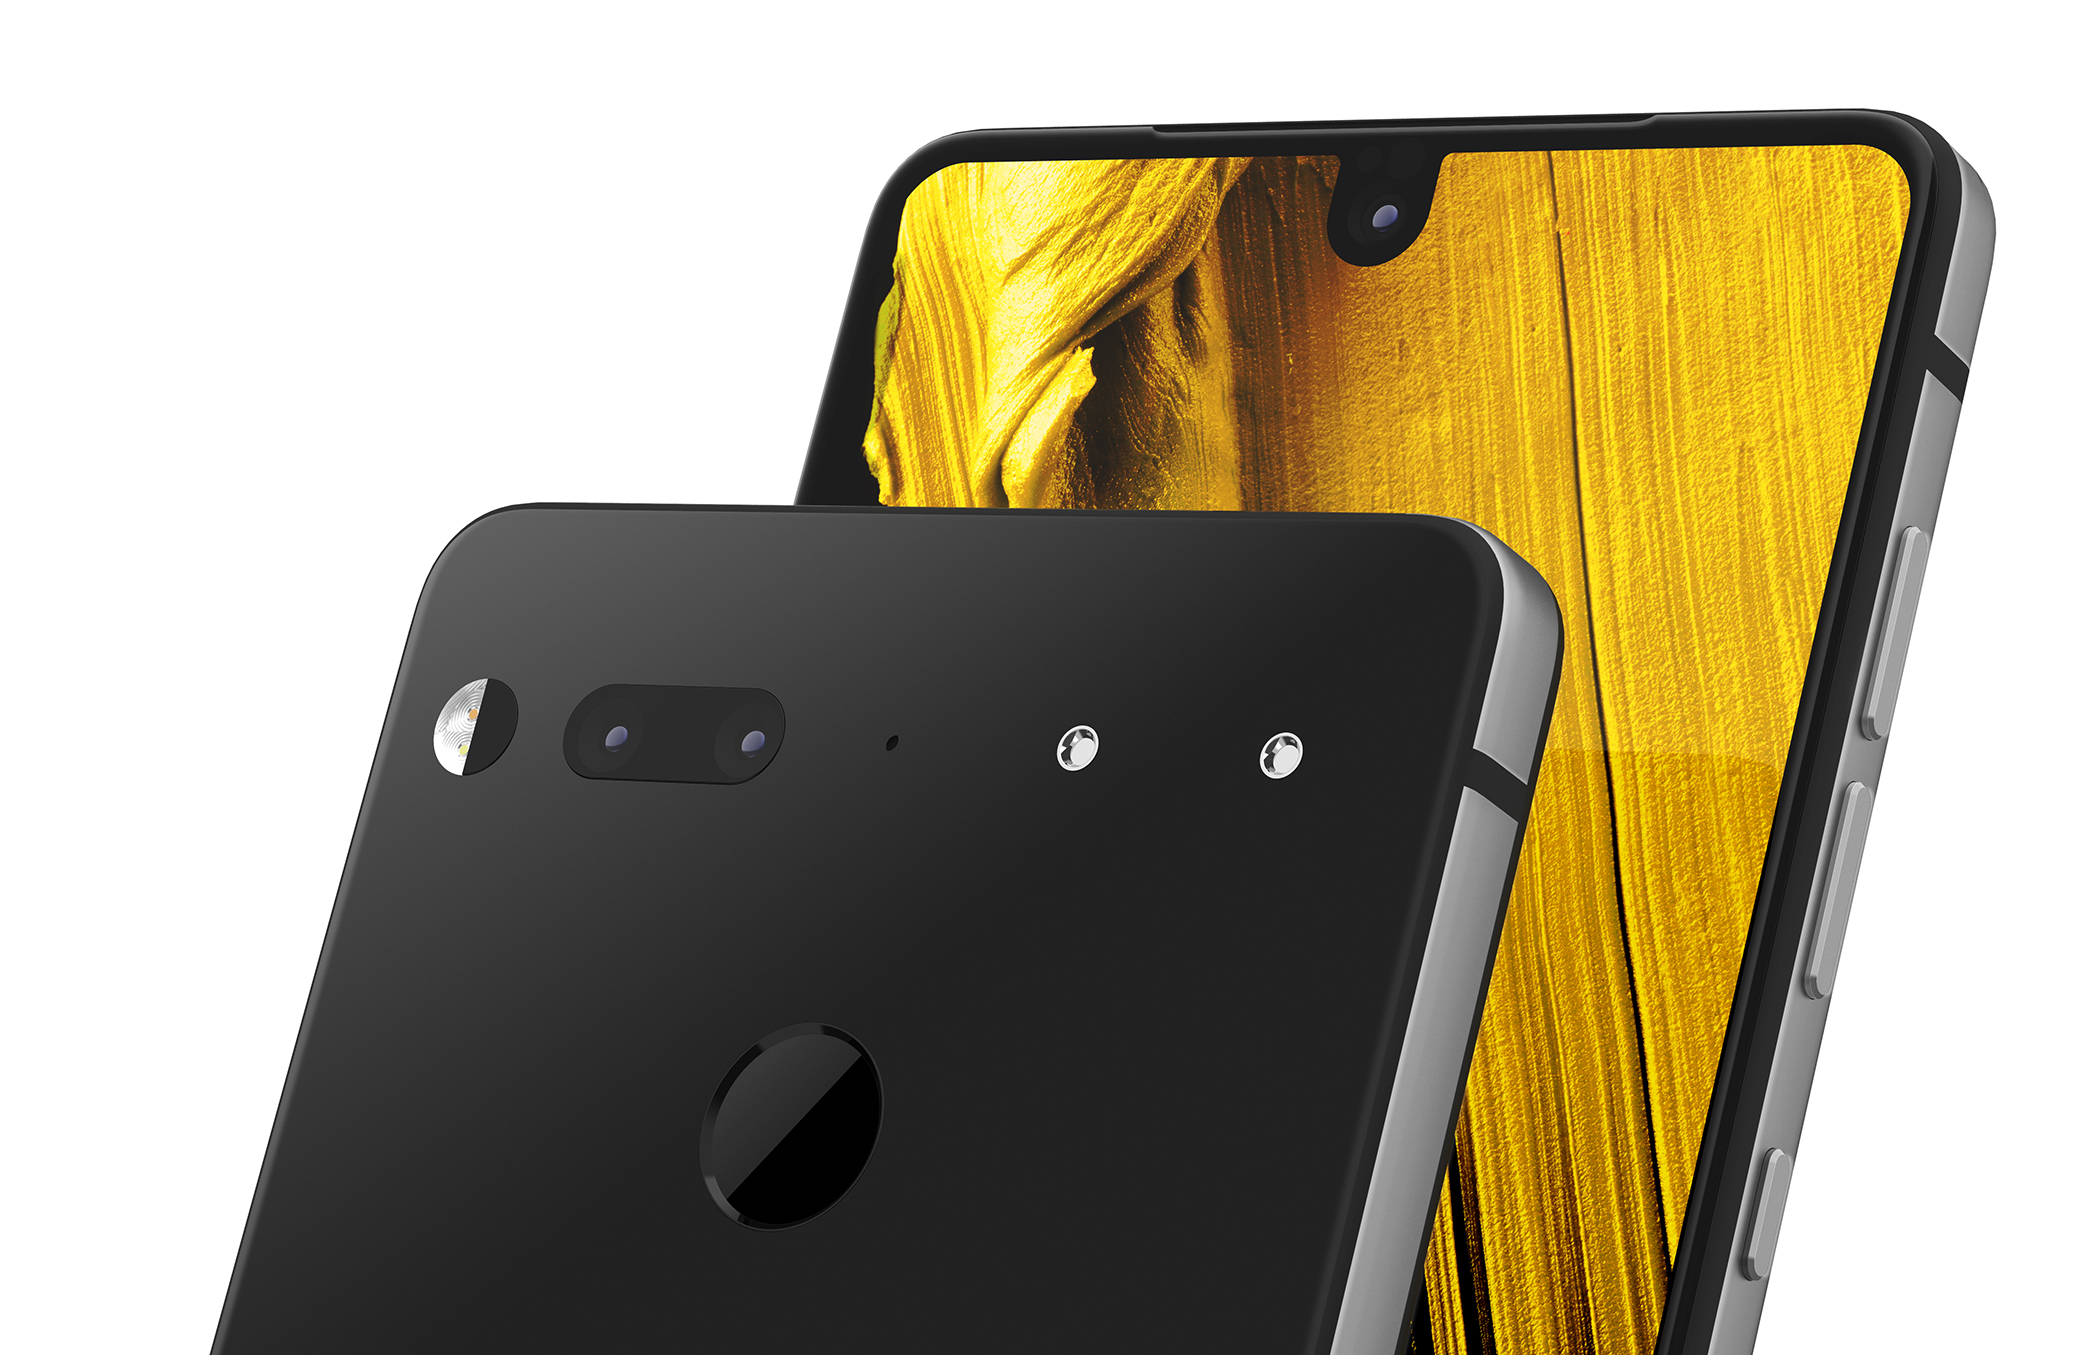 Essential Phone's new 'Halo Gray' color goes on sale exclusively 